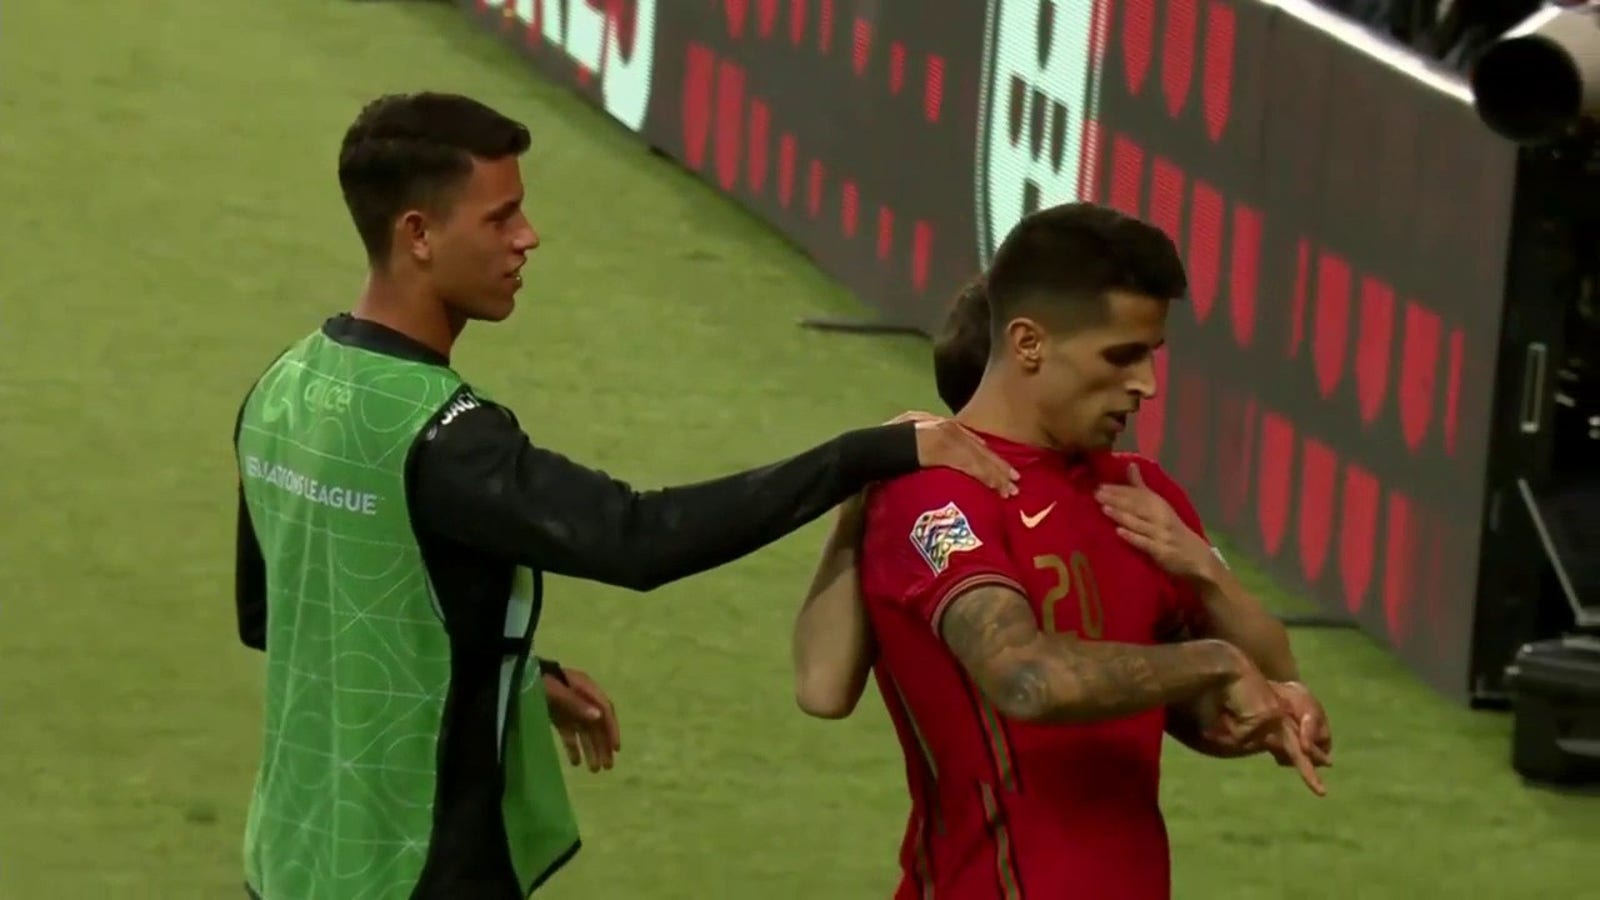 João Cancelo's shifty ball handling and goal extends Portugal's lead to 4-0